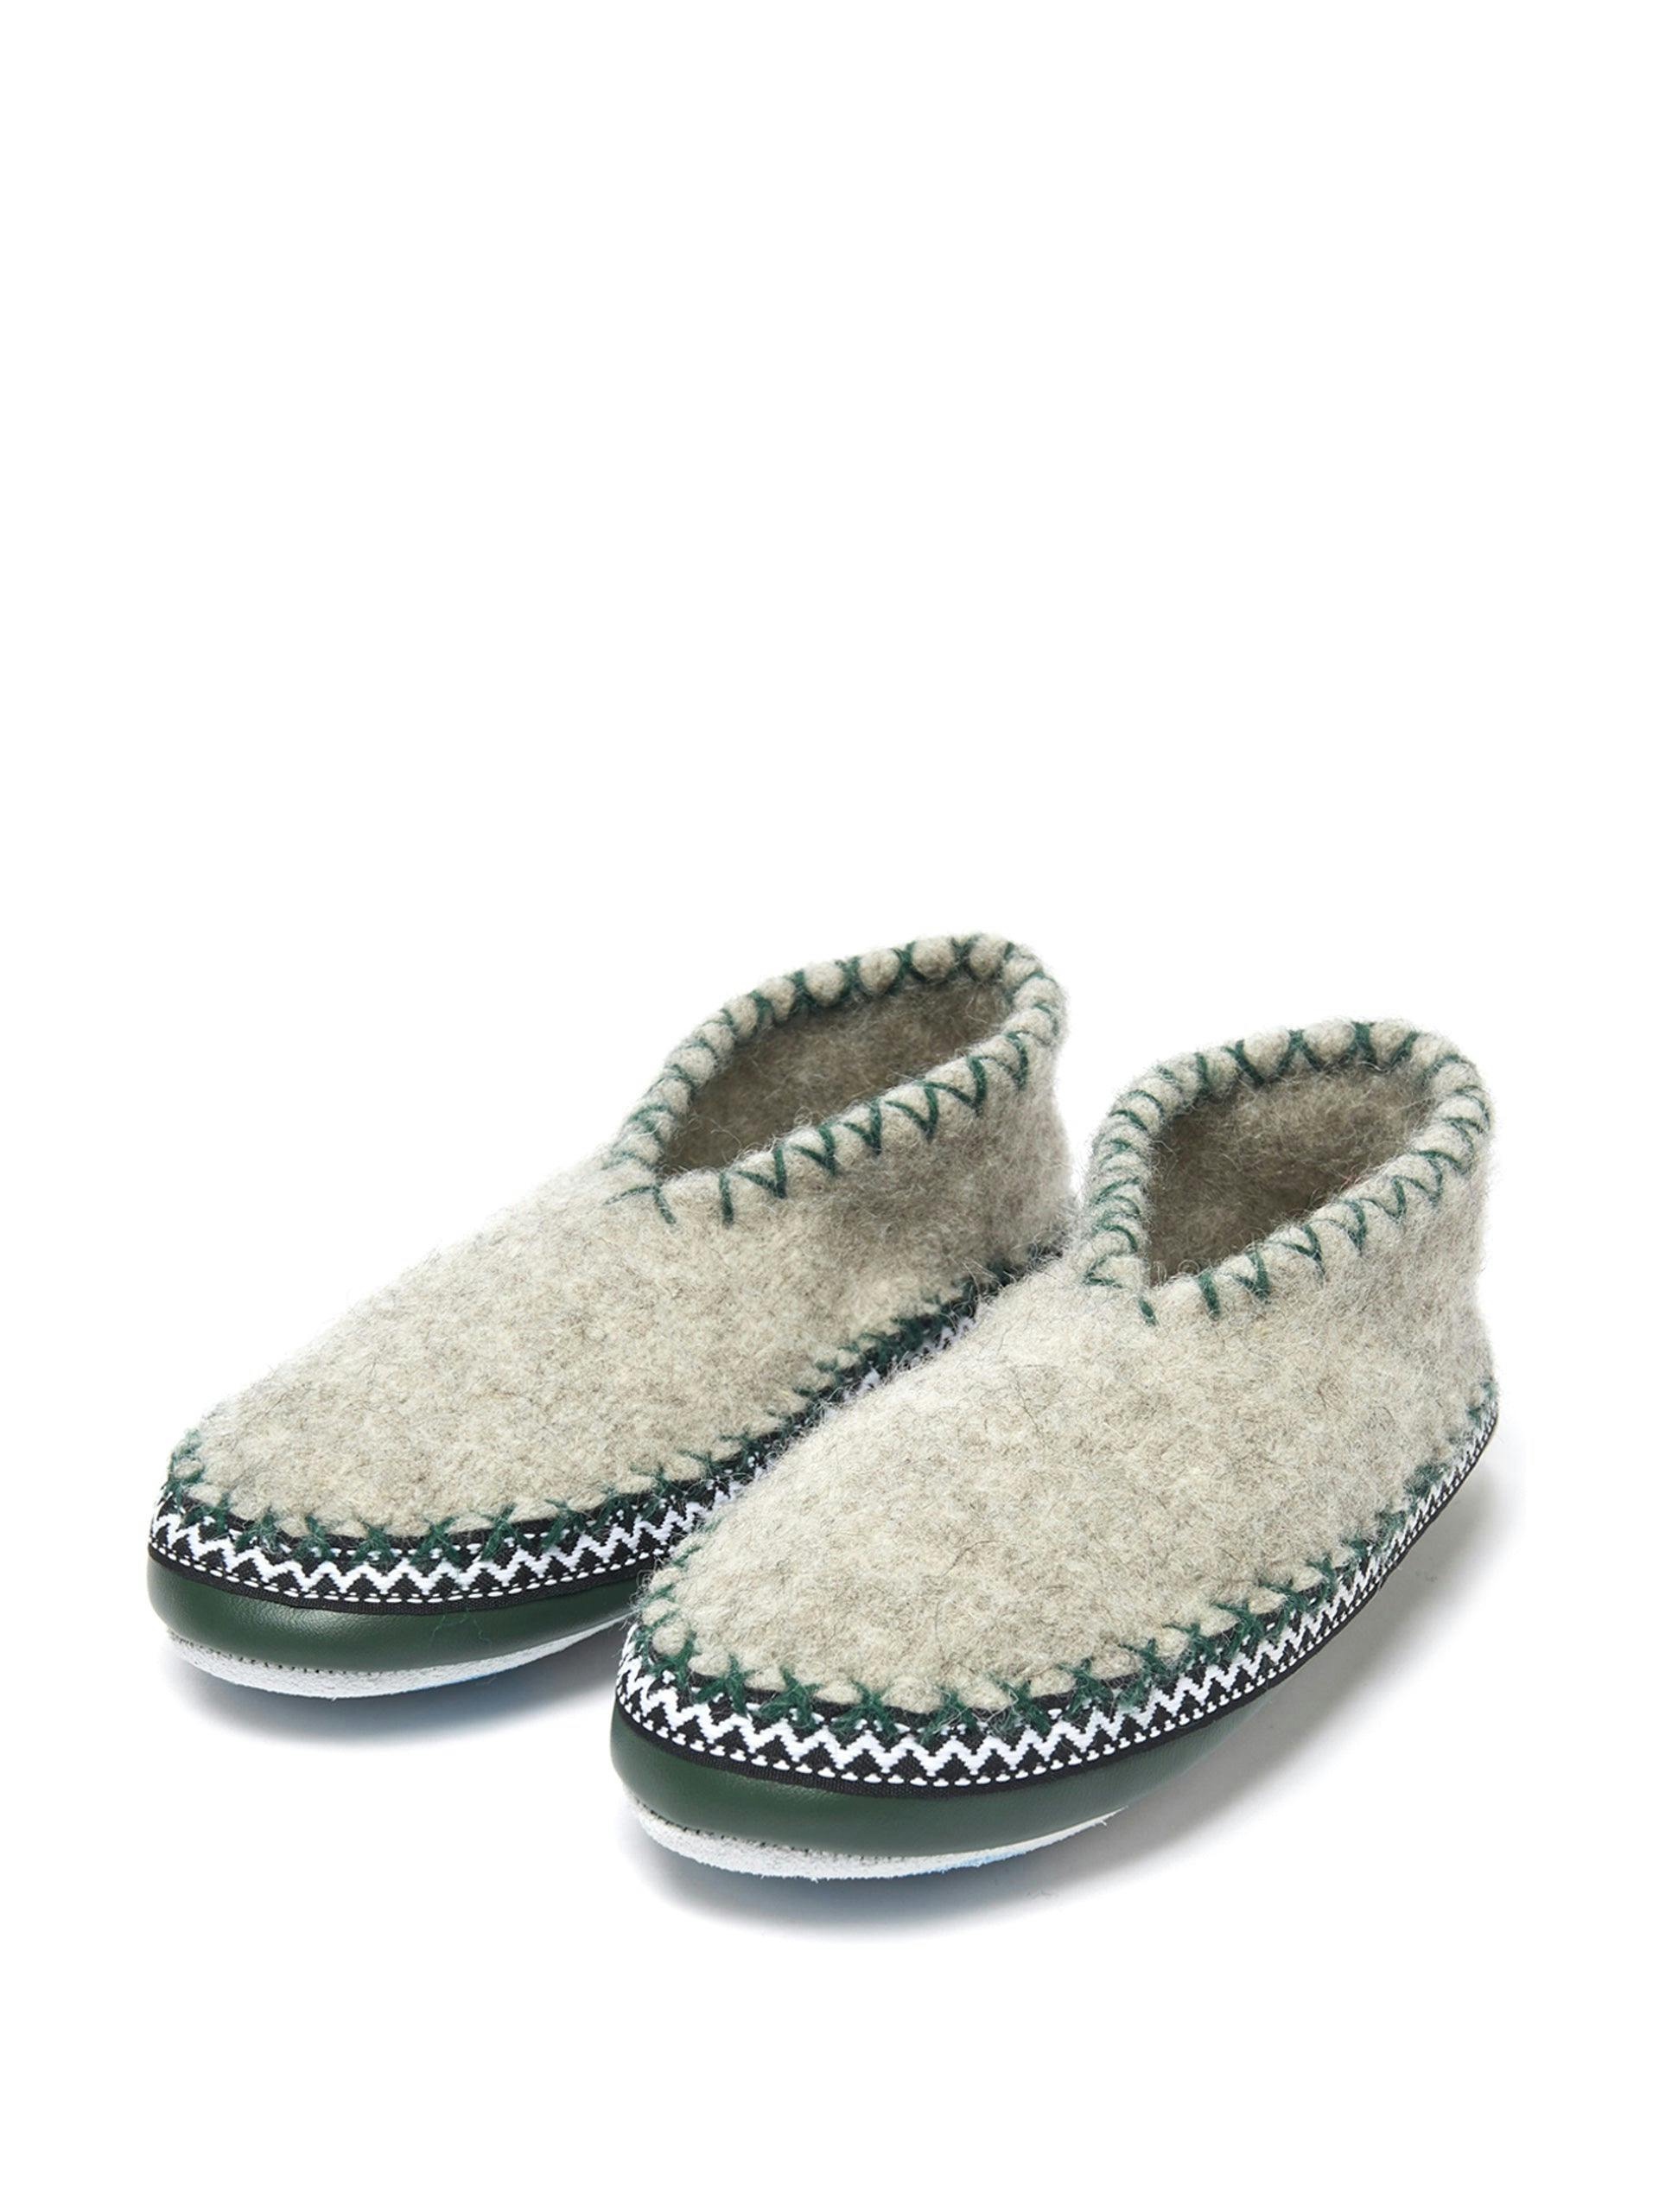 Felted wool slippers